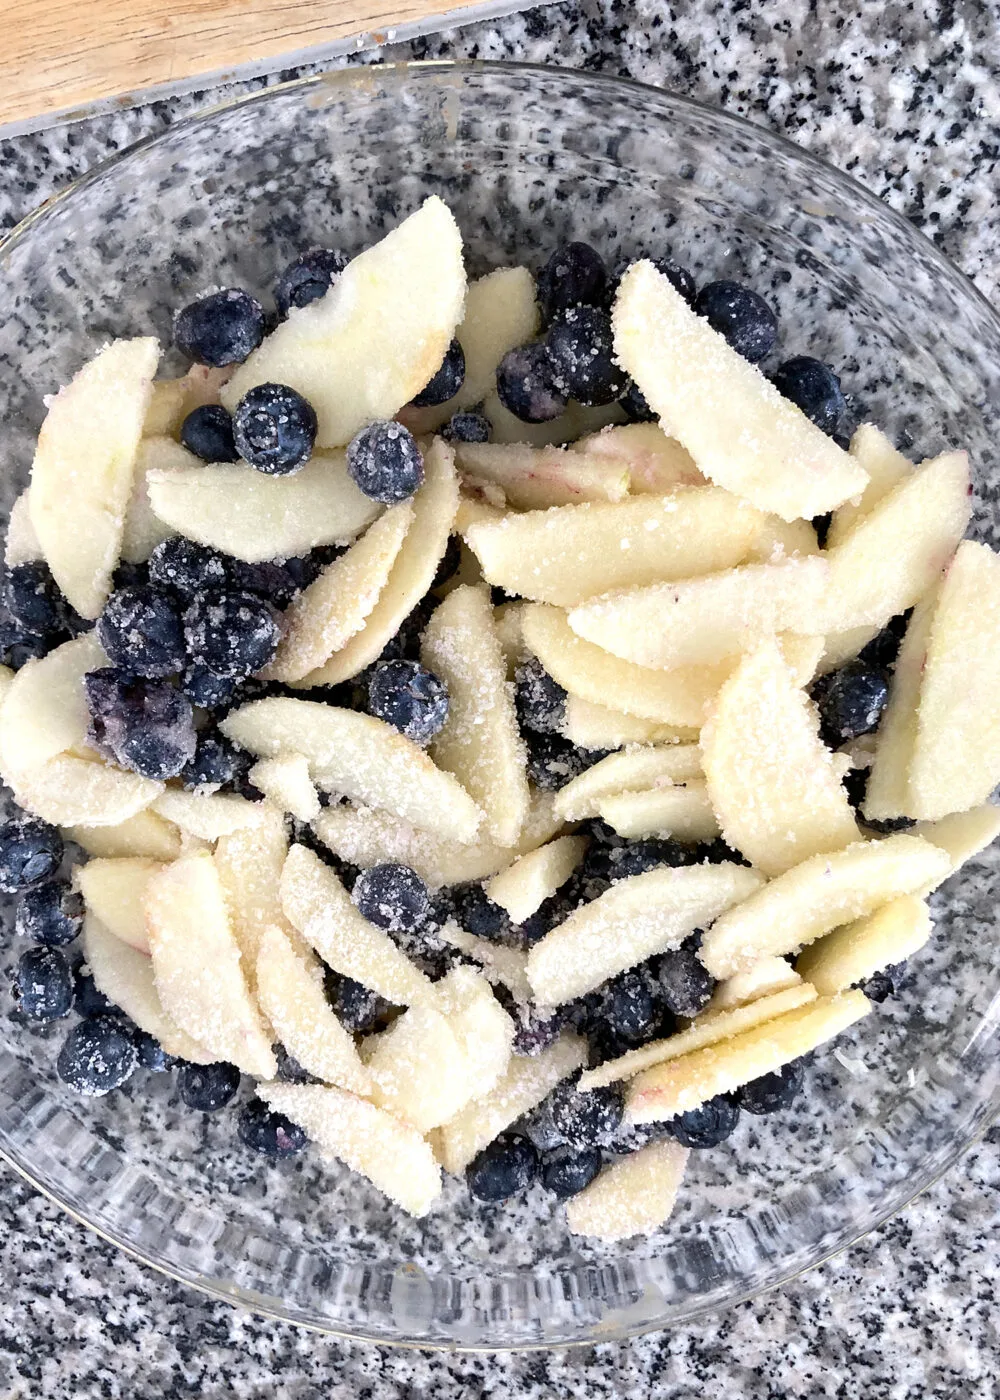 Blueberries and sliced apples dusted with sugar and flour can be seen in a clear bowl on a countertop.